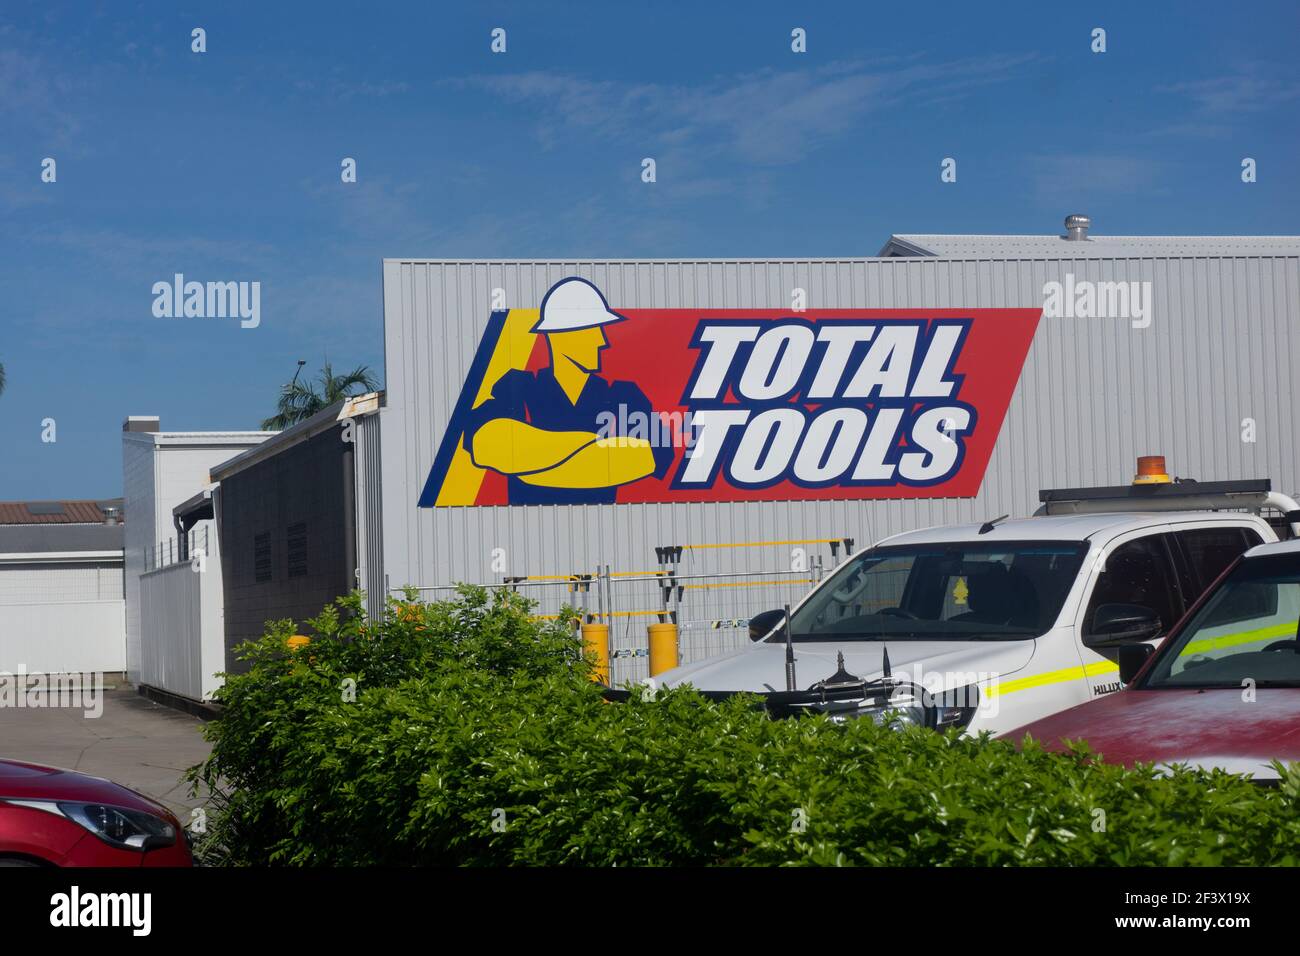 Total Tools Warehouse For Hardware And Tools With A Sign On A White Metal Wall And Vehicles Parked In Front In Mackay Queensland Australia With Copy Stock Photo Alamy